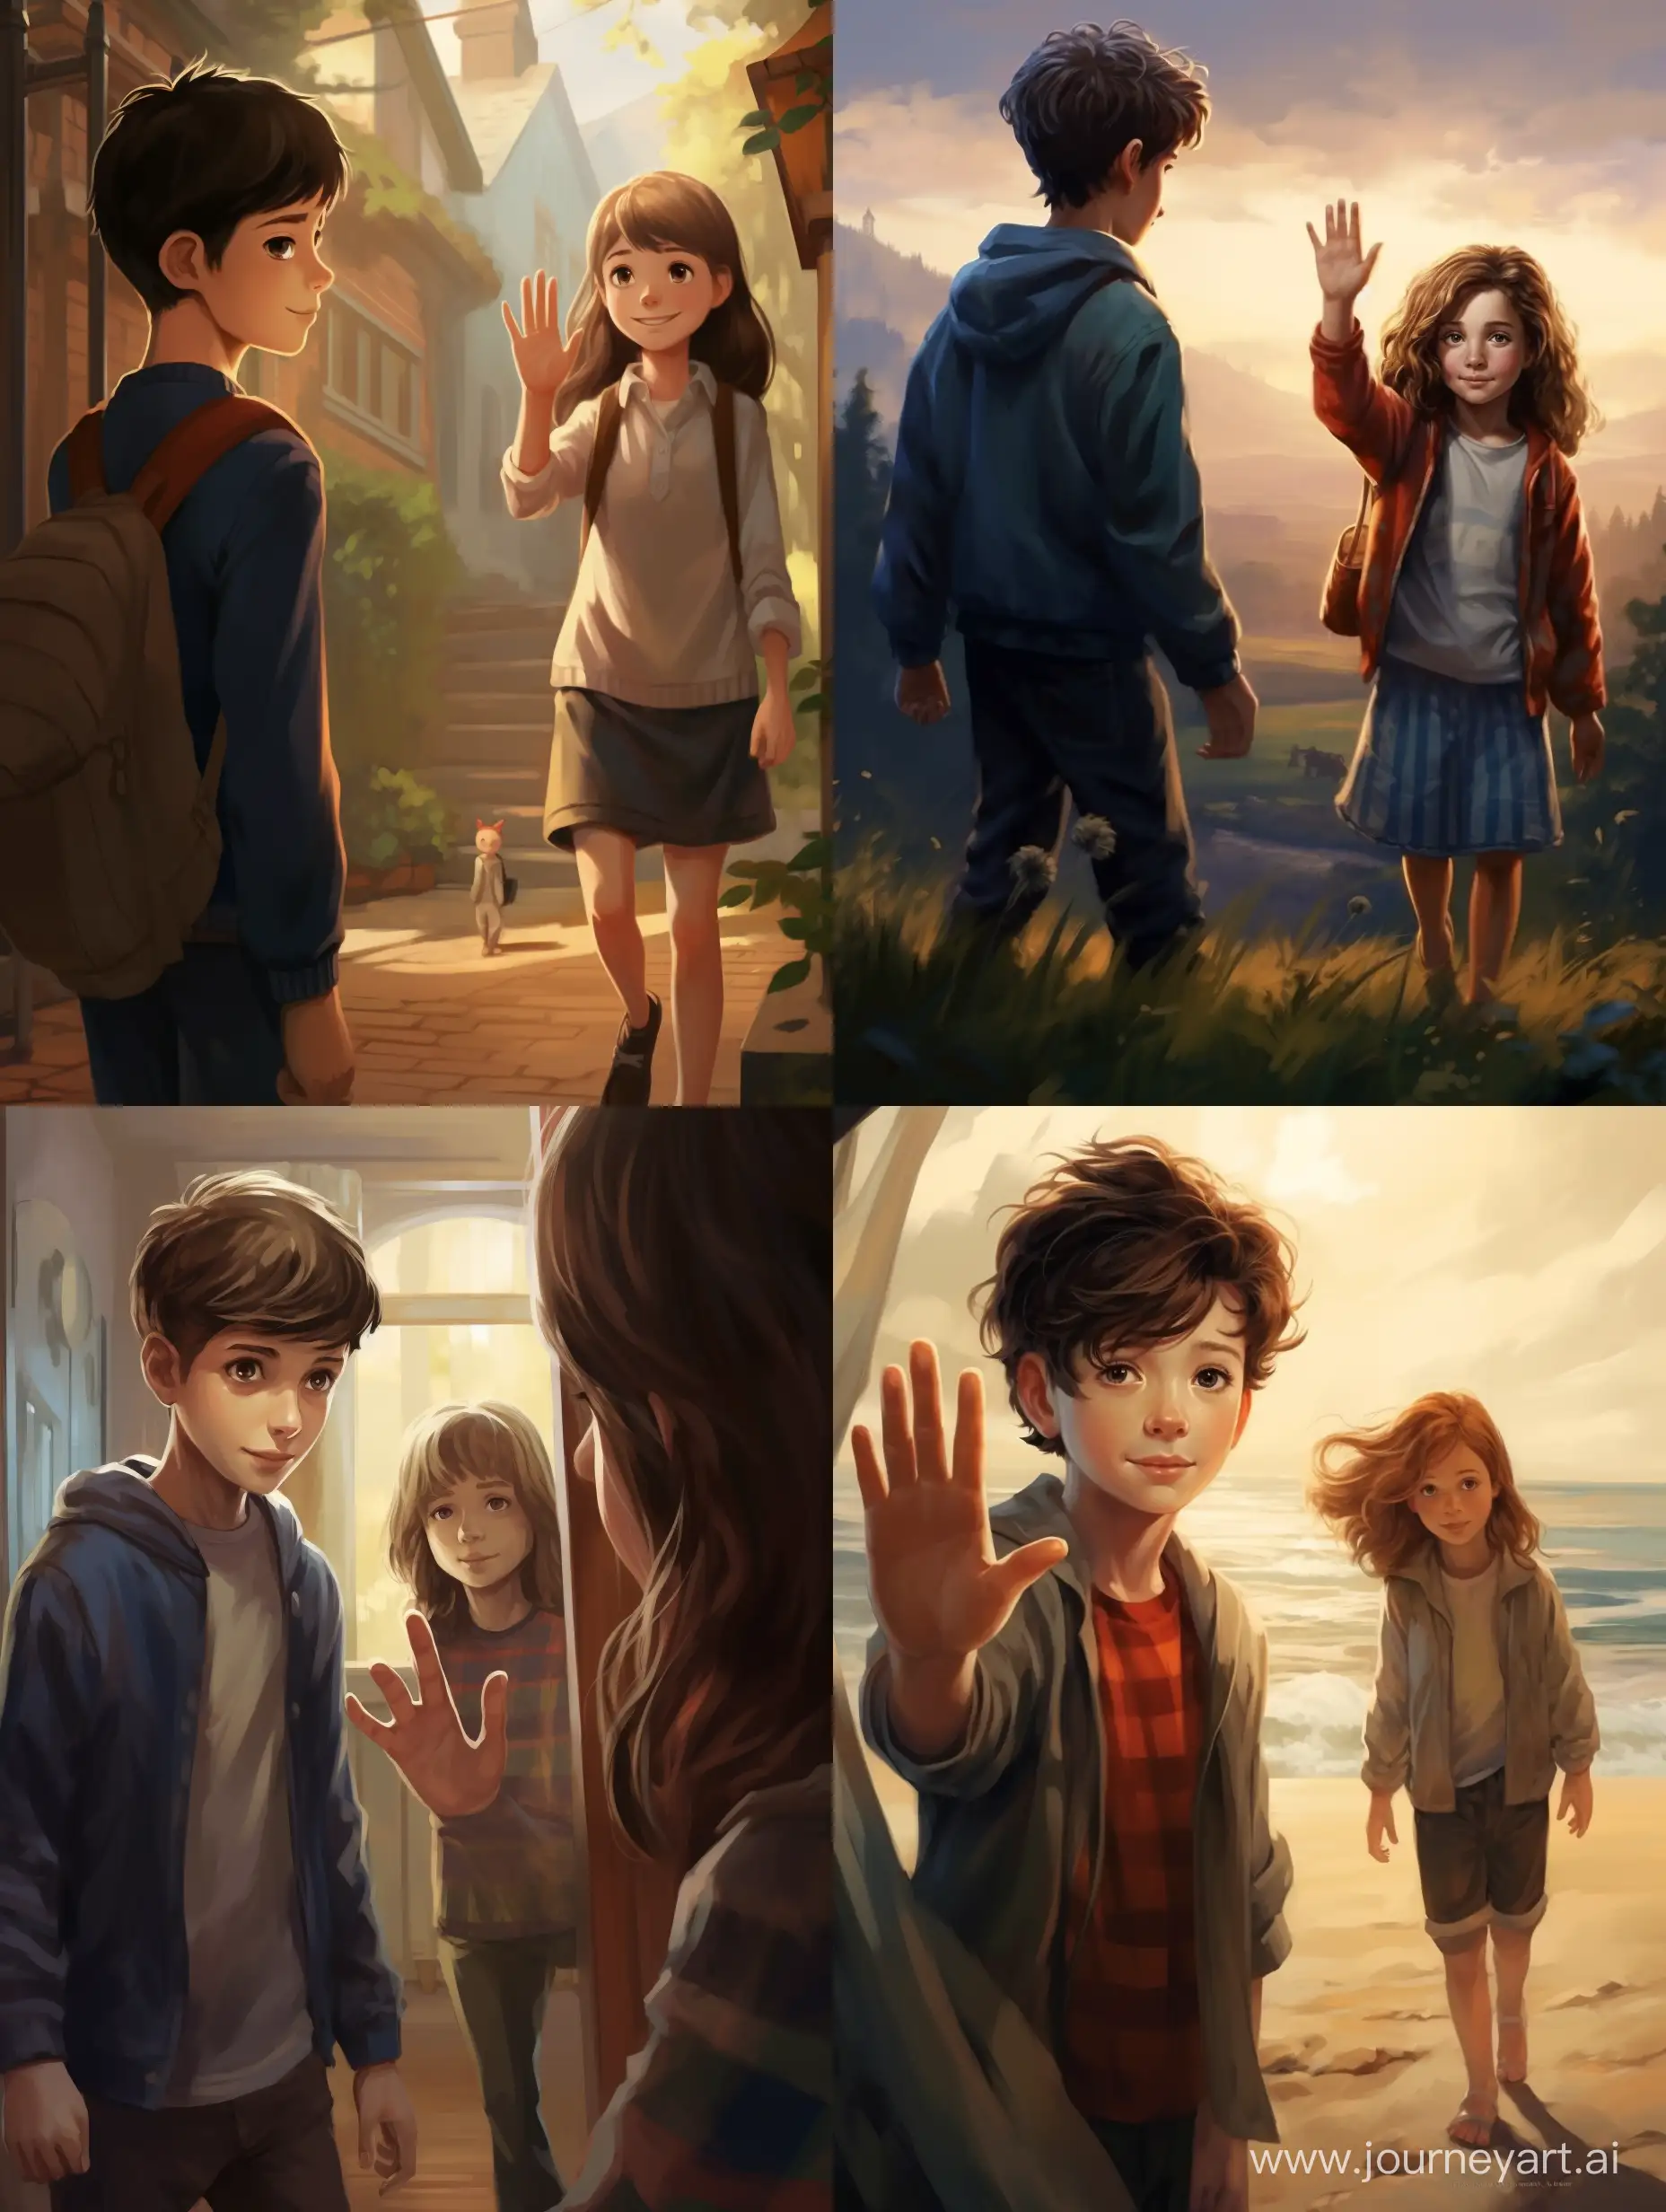 The boy waves his hand, says goodbye, and the girl leaves in the background.